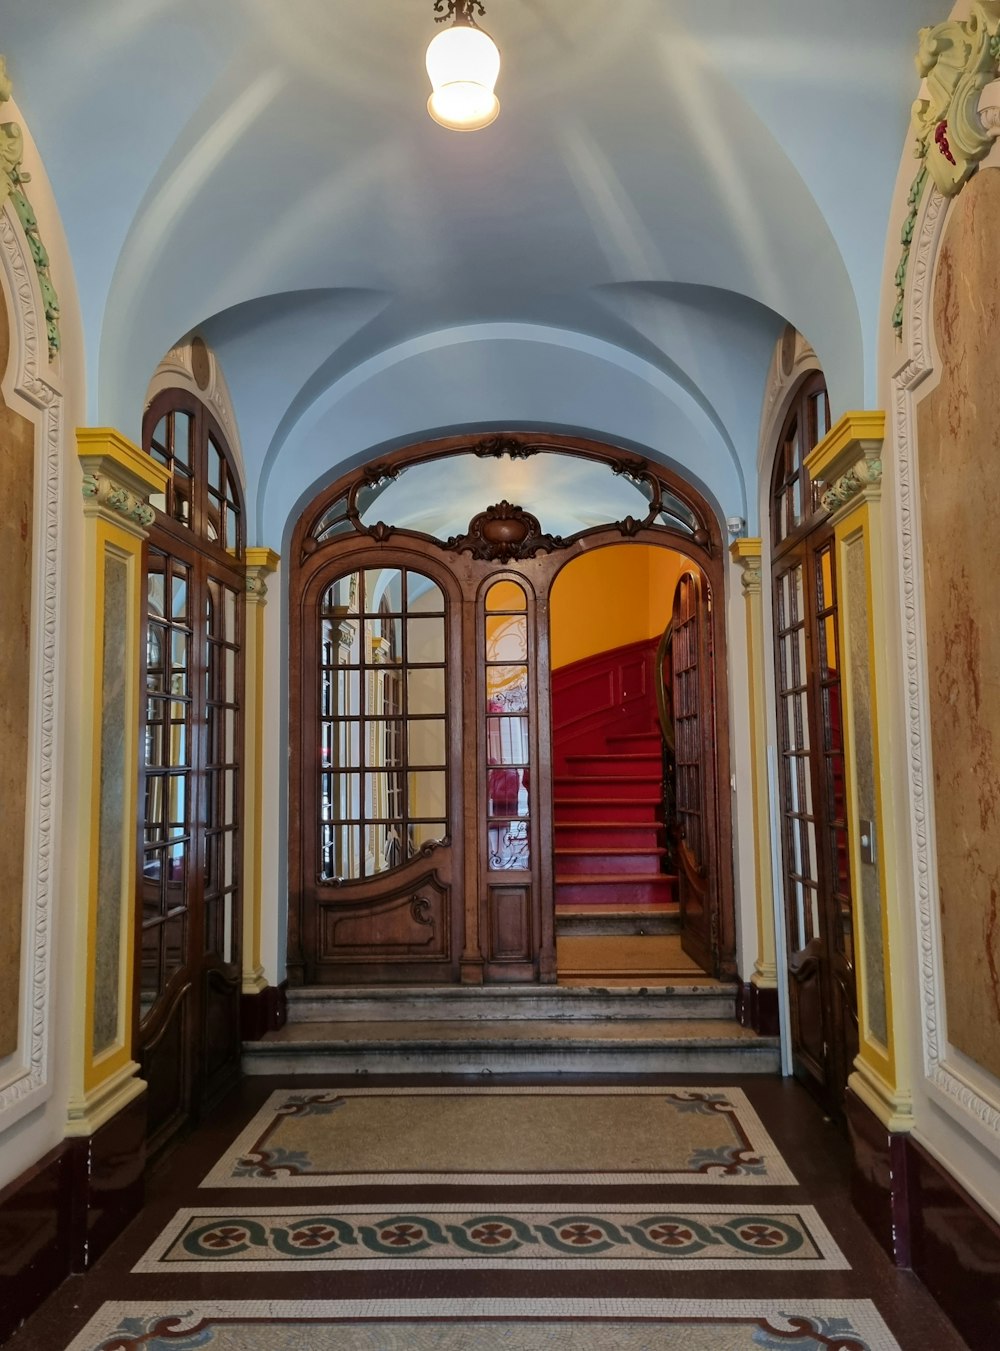 a doorway with a red carpet and a red stair case